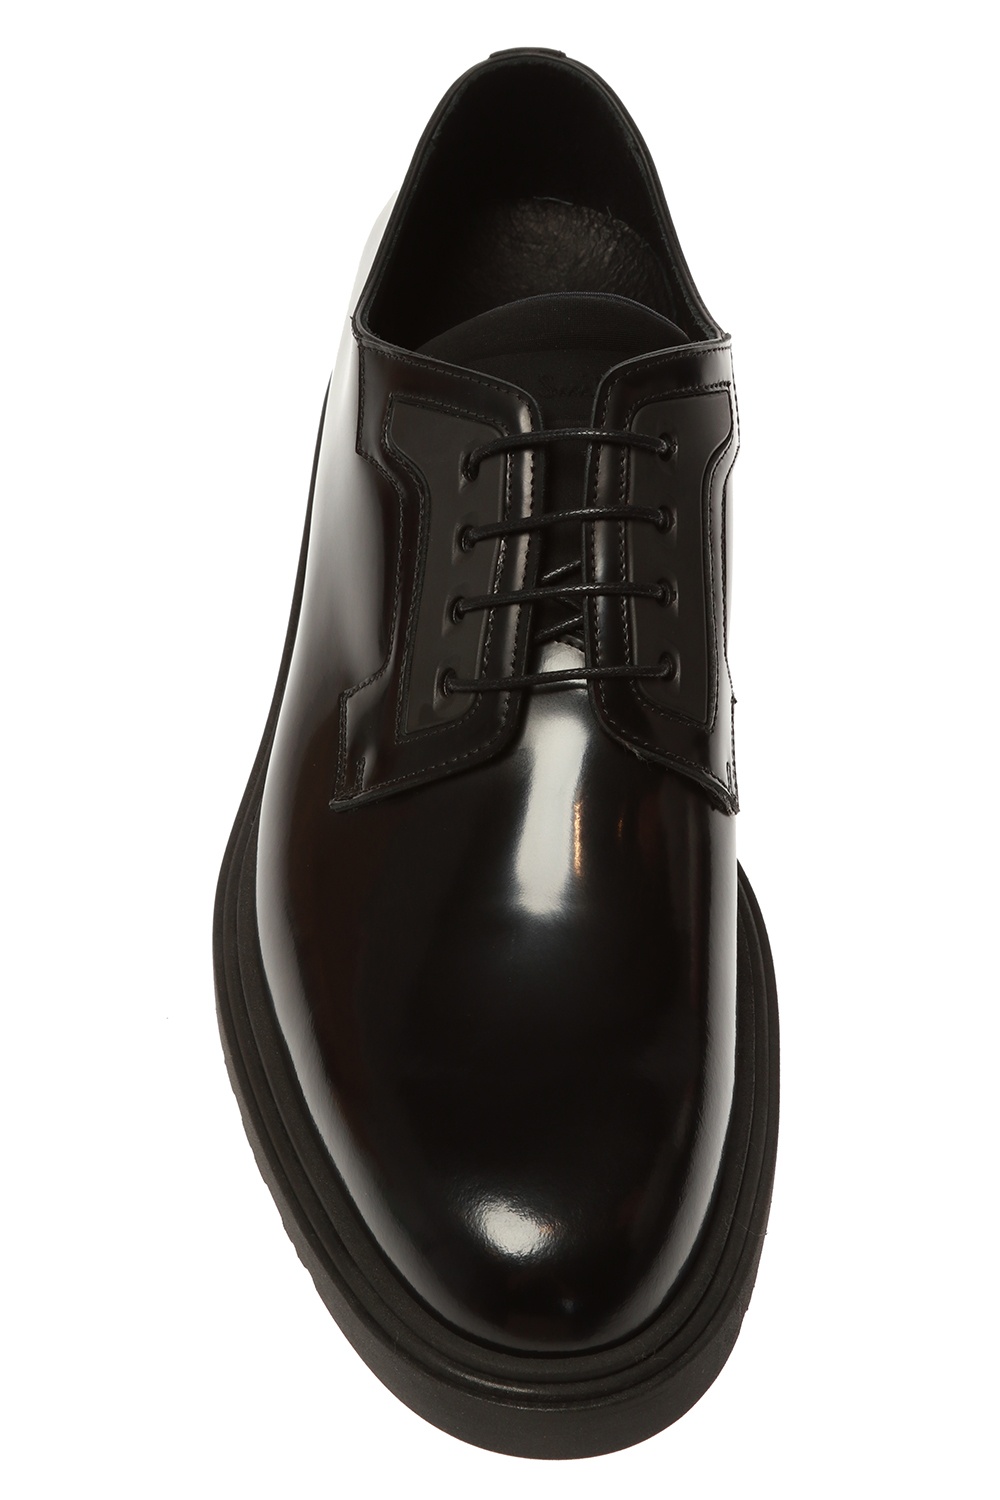 paul smith leather shoes